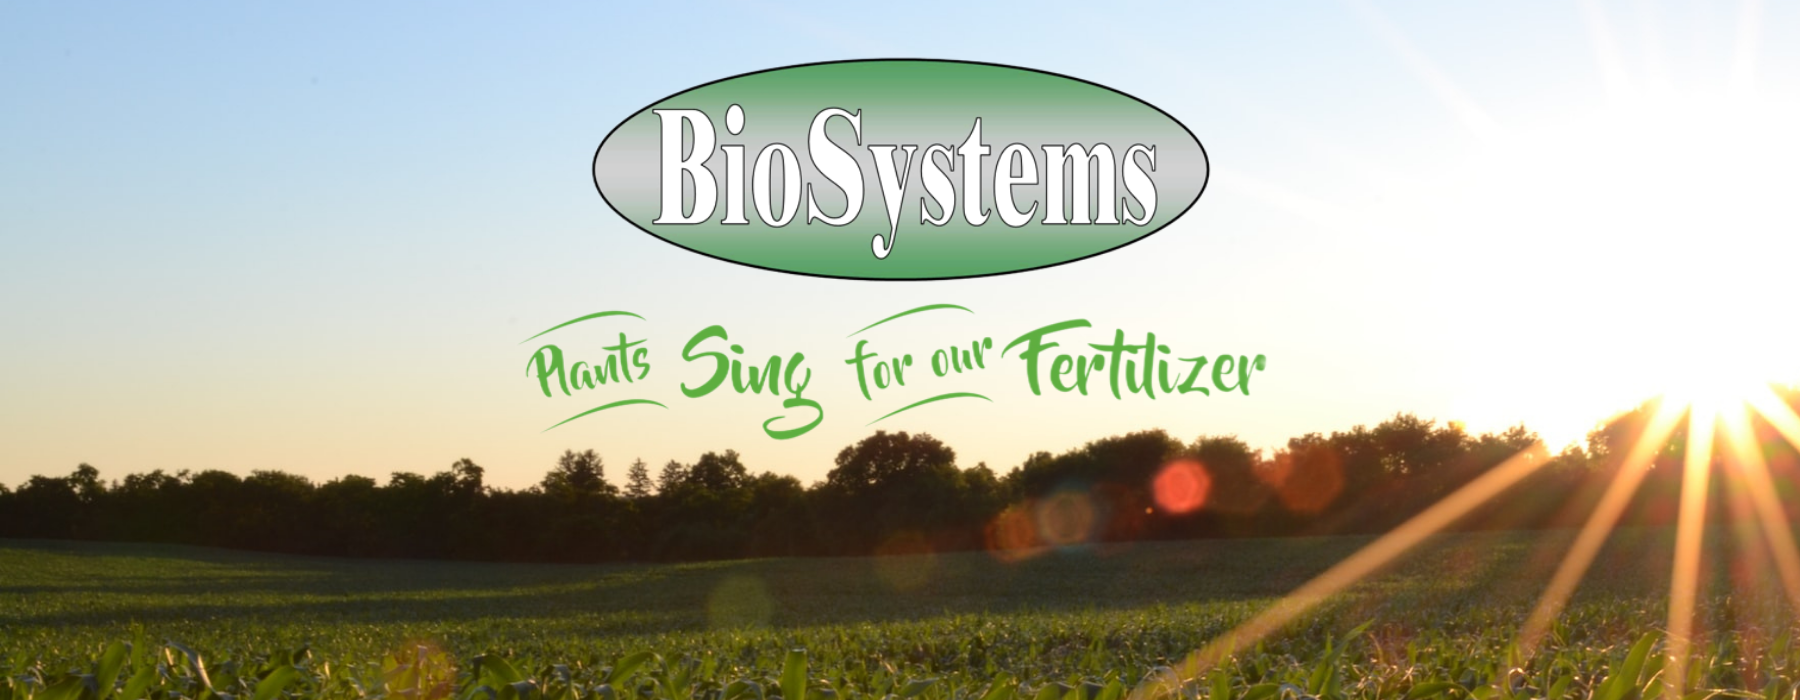 BioSystems - History, Process and Products